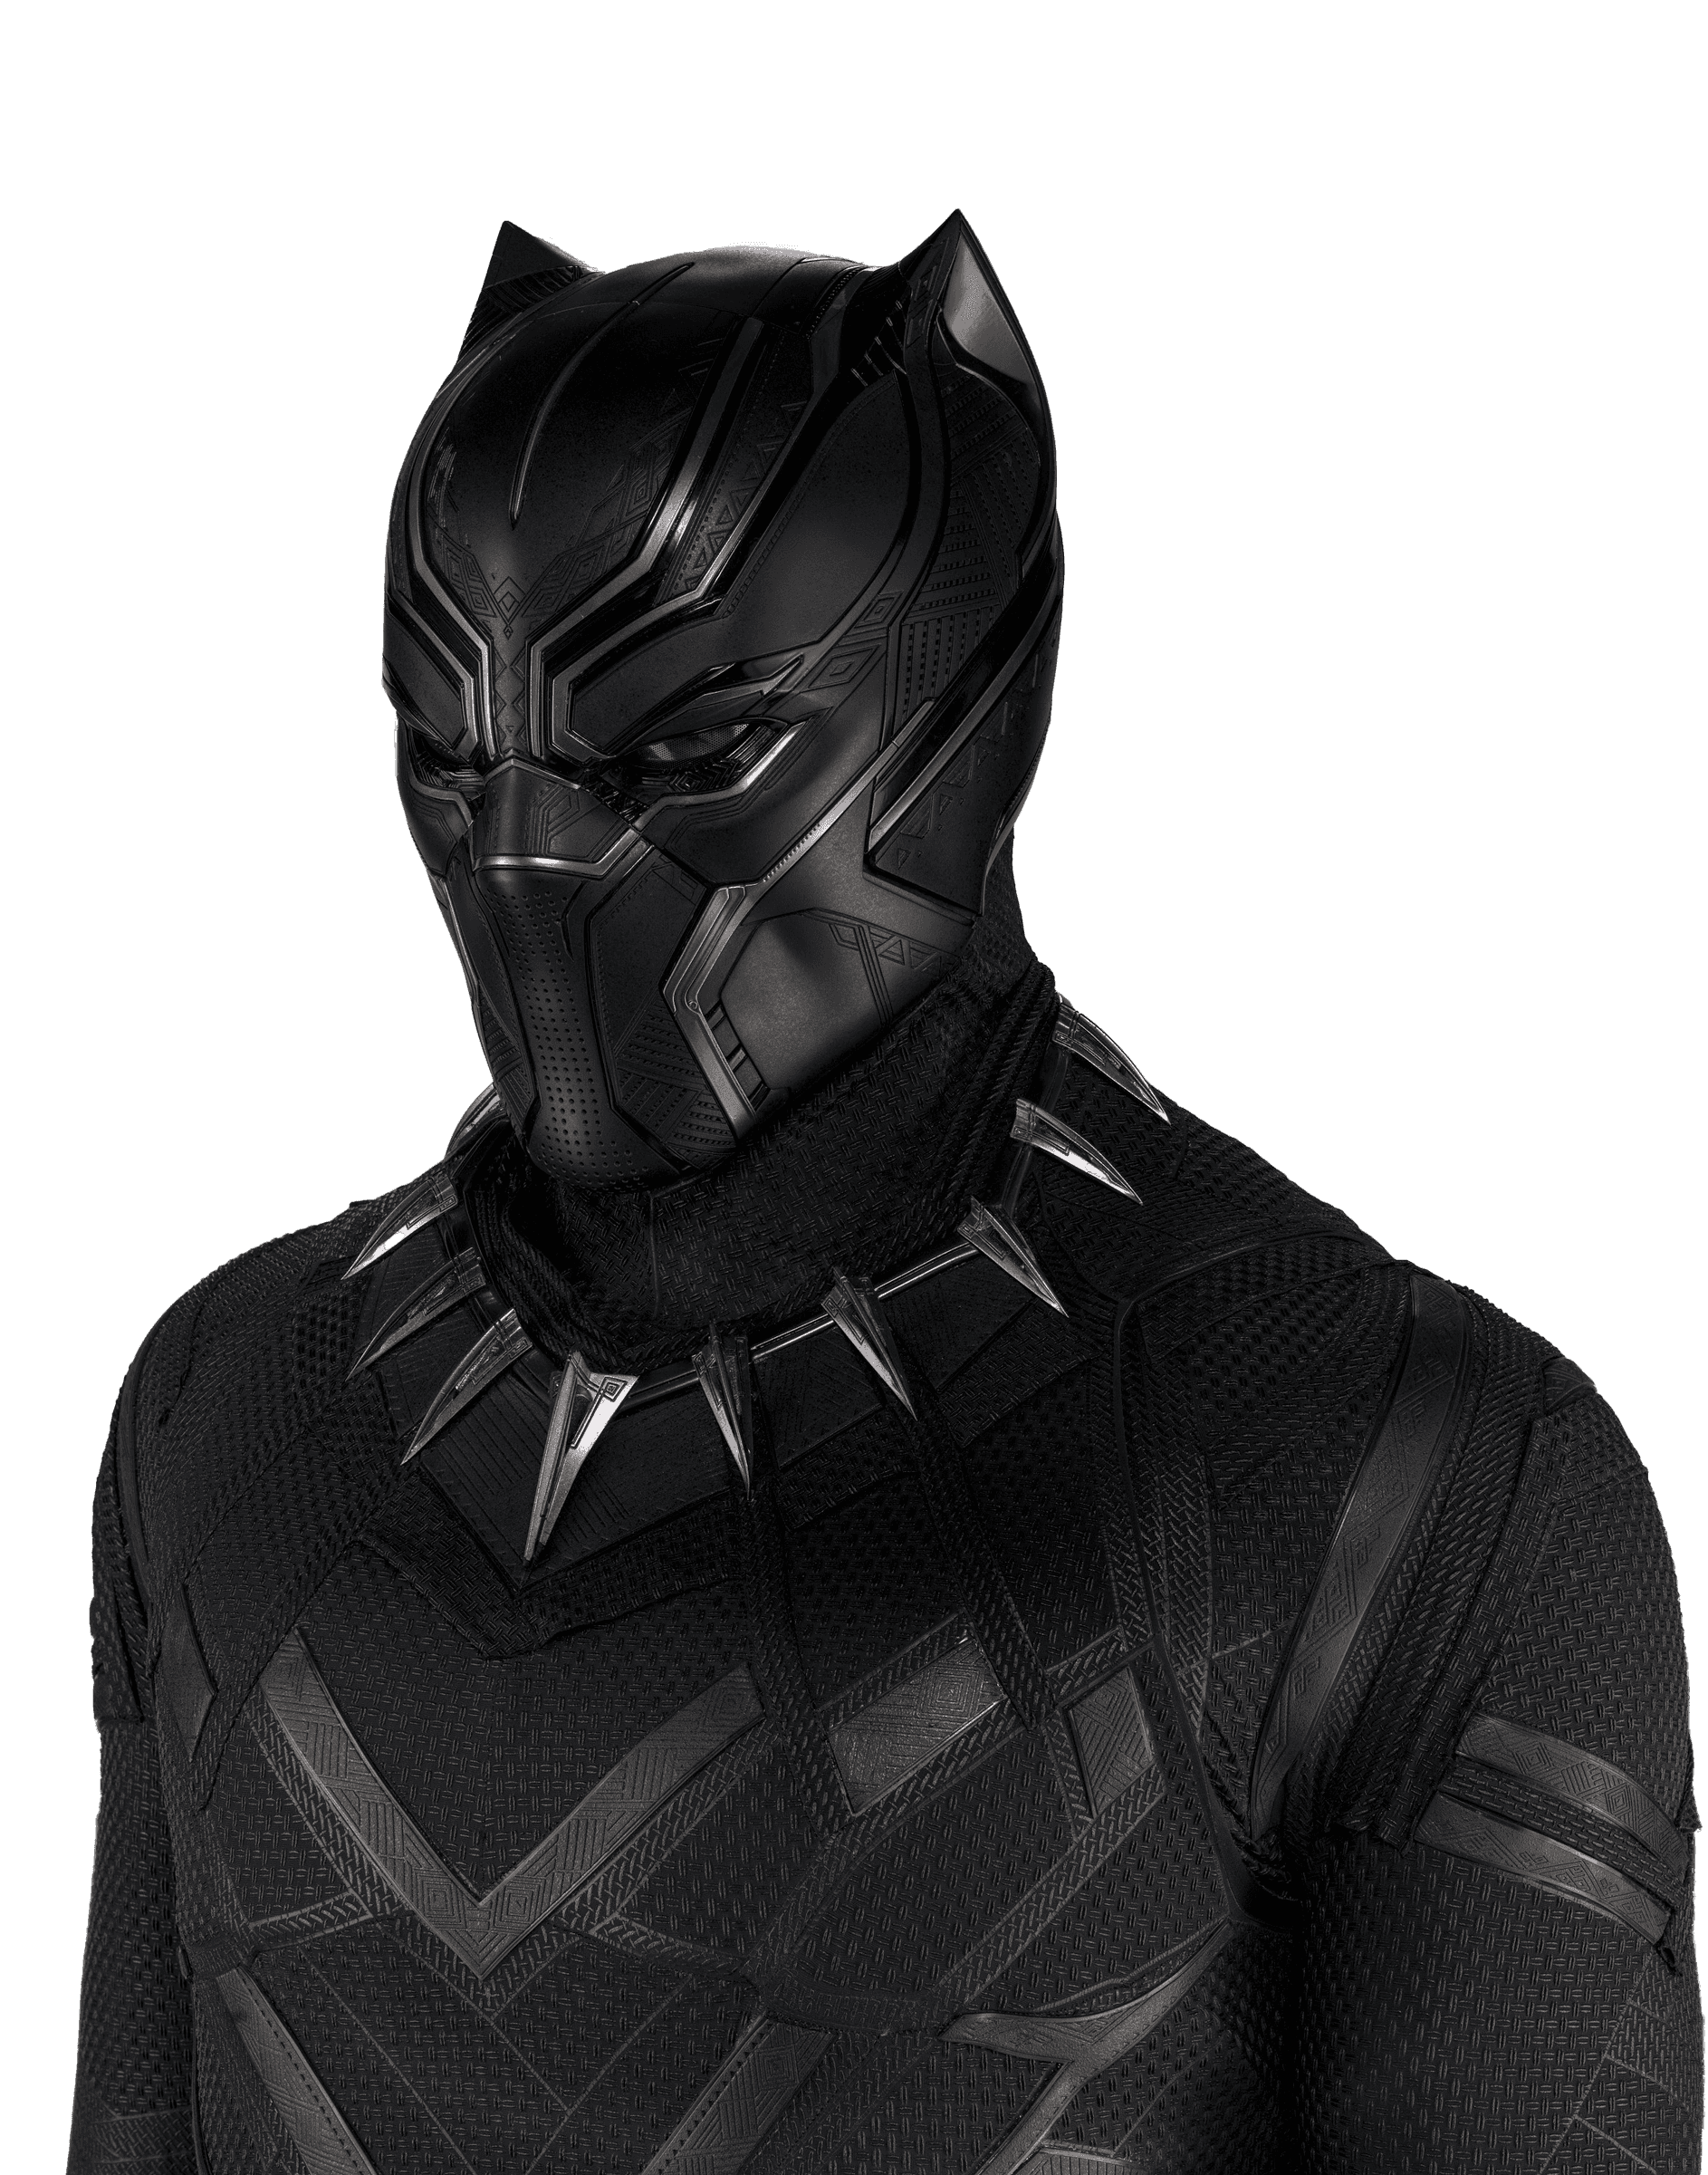 A head to chest view of the Black Panther suit. Fully covering the face, the suit is a sleek and cat like.